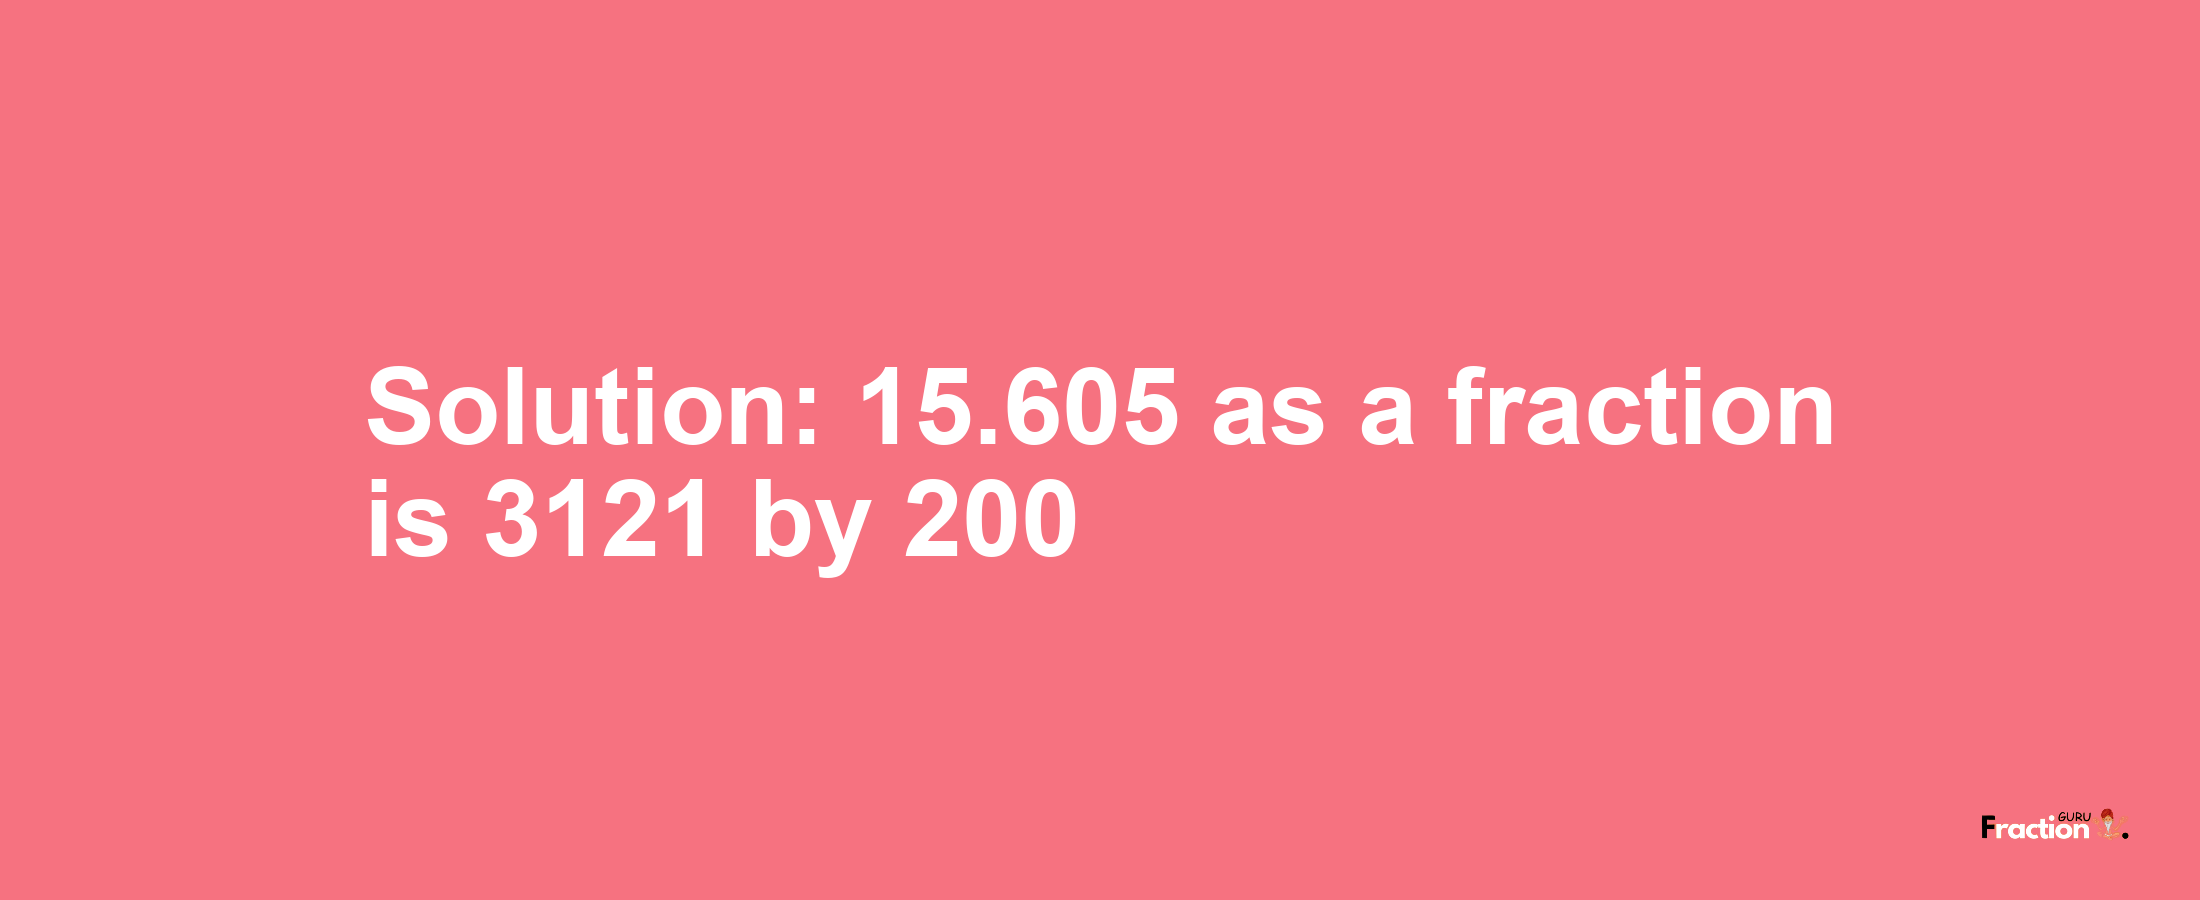 Solution:15.605 as a fraction is 3121/200